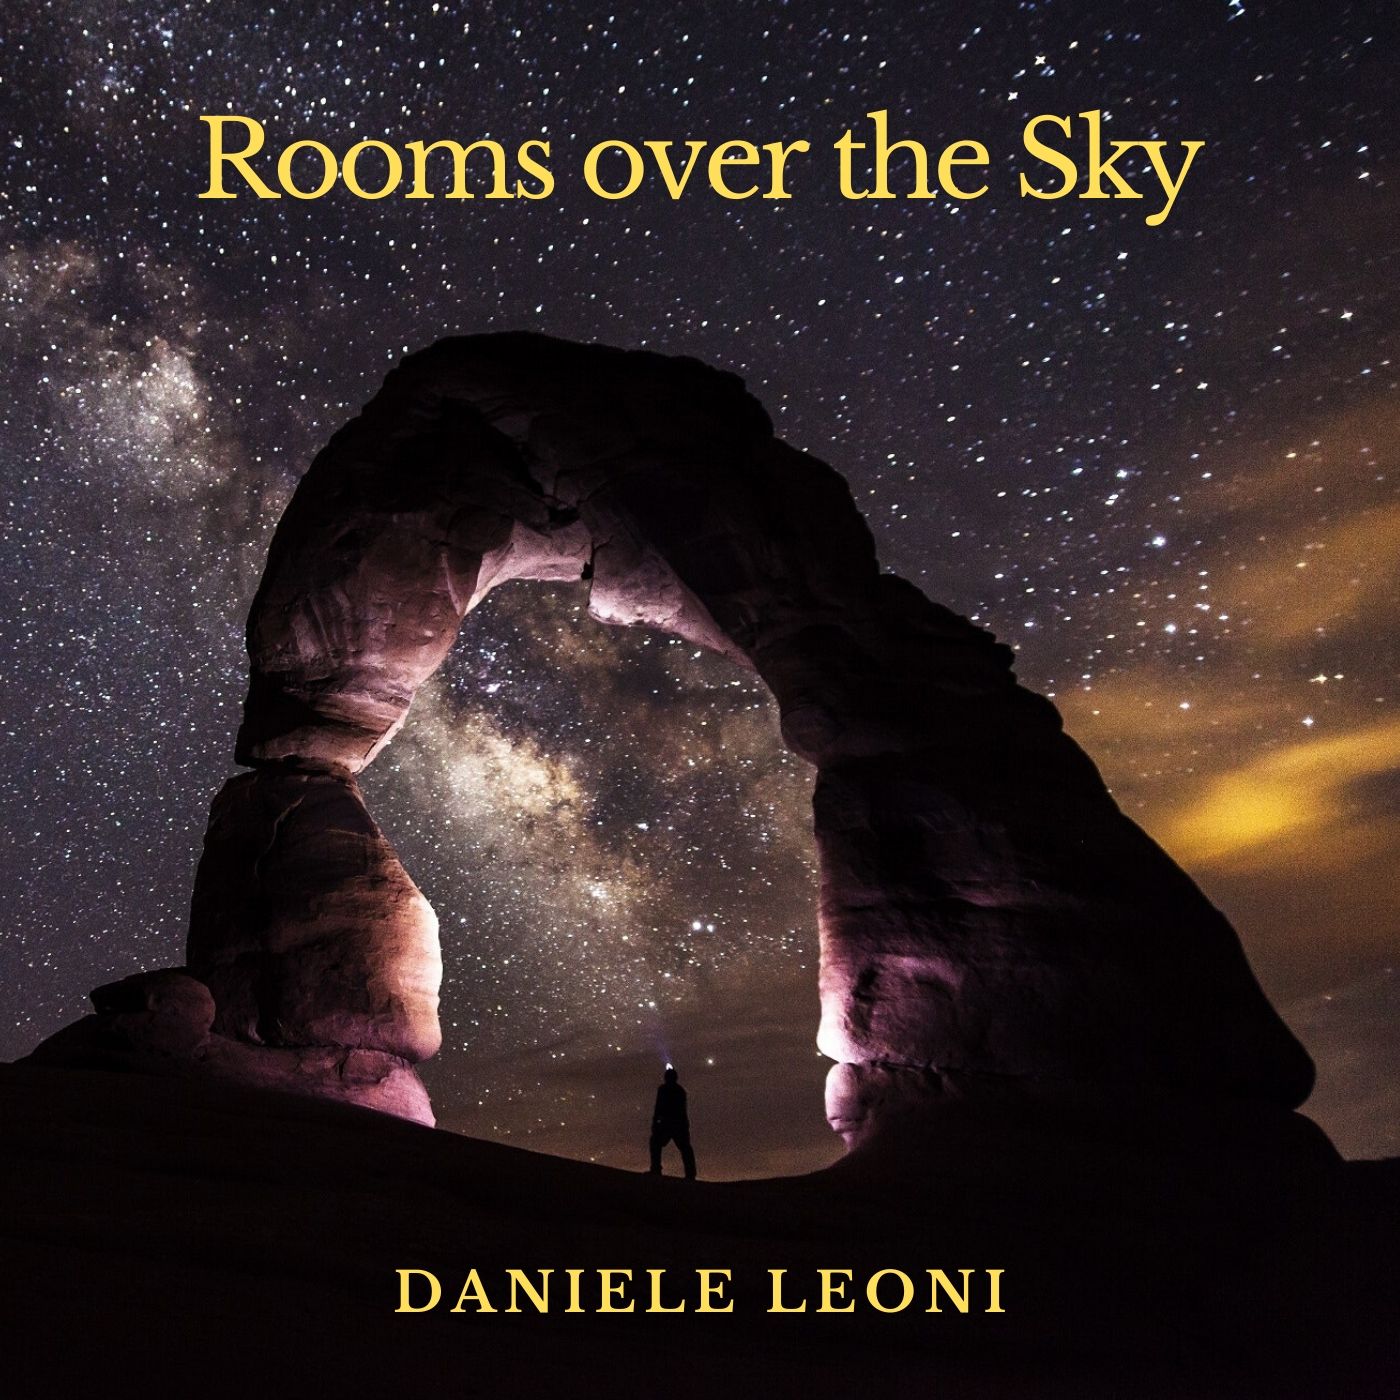 Rooms over the Sky